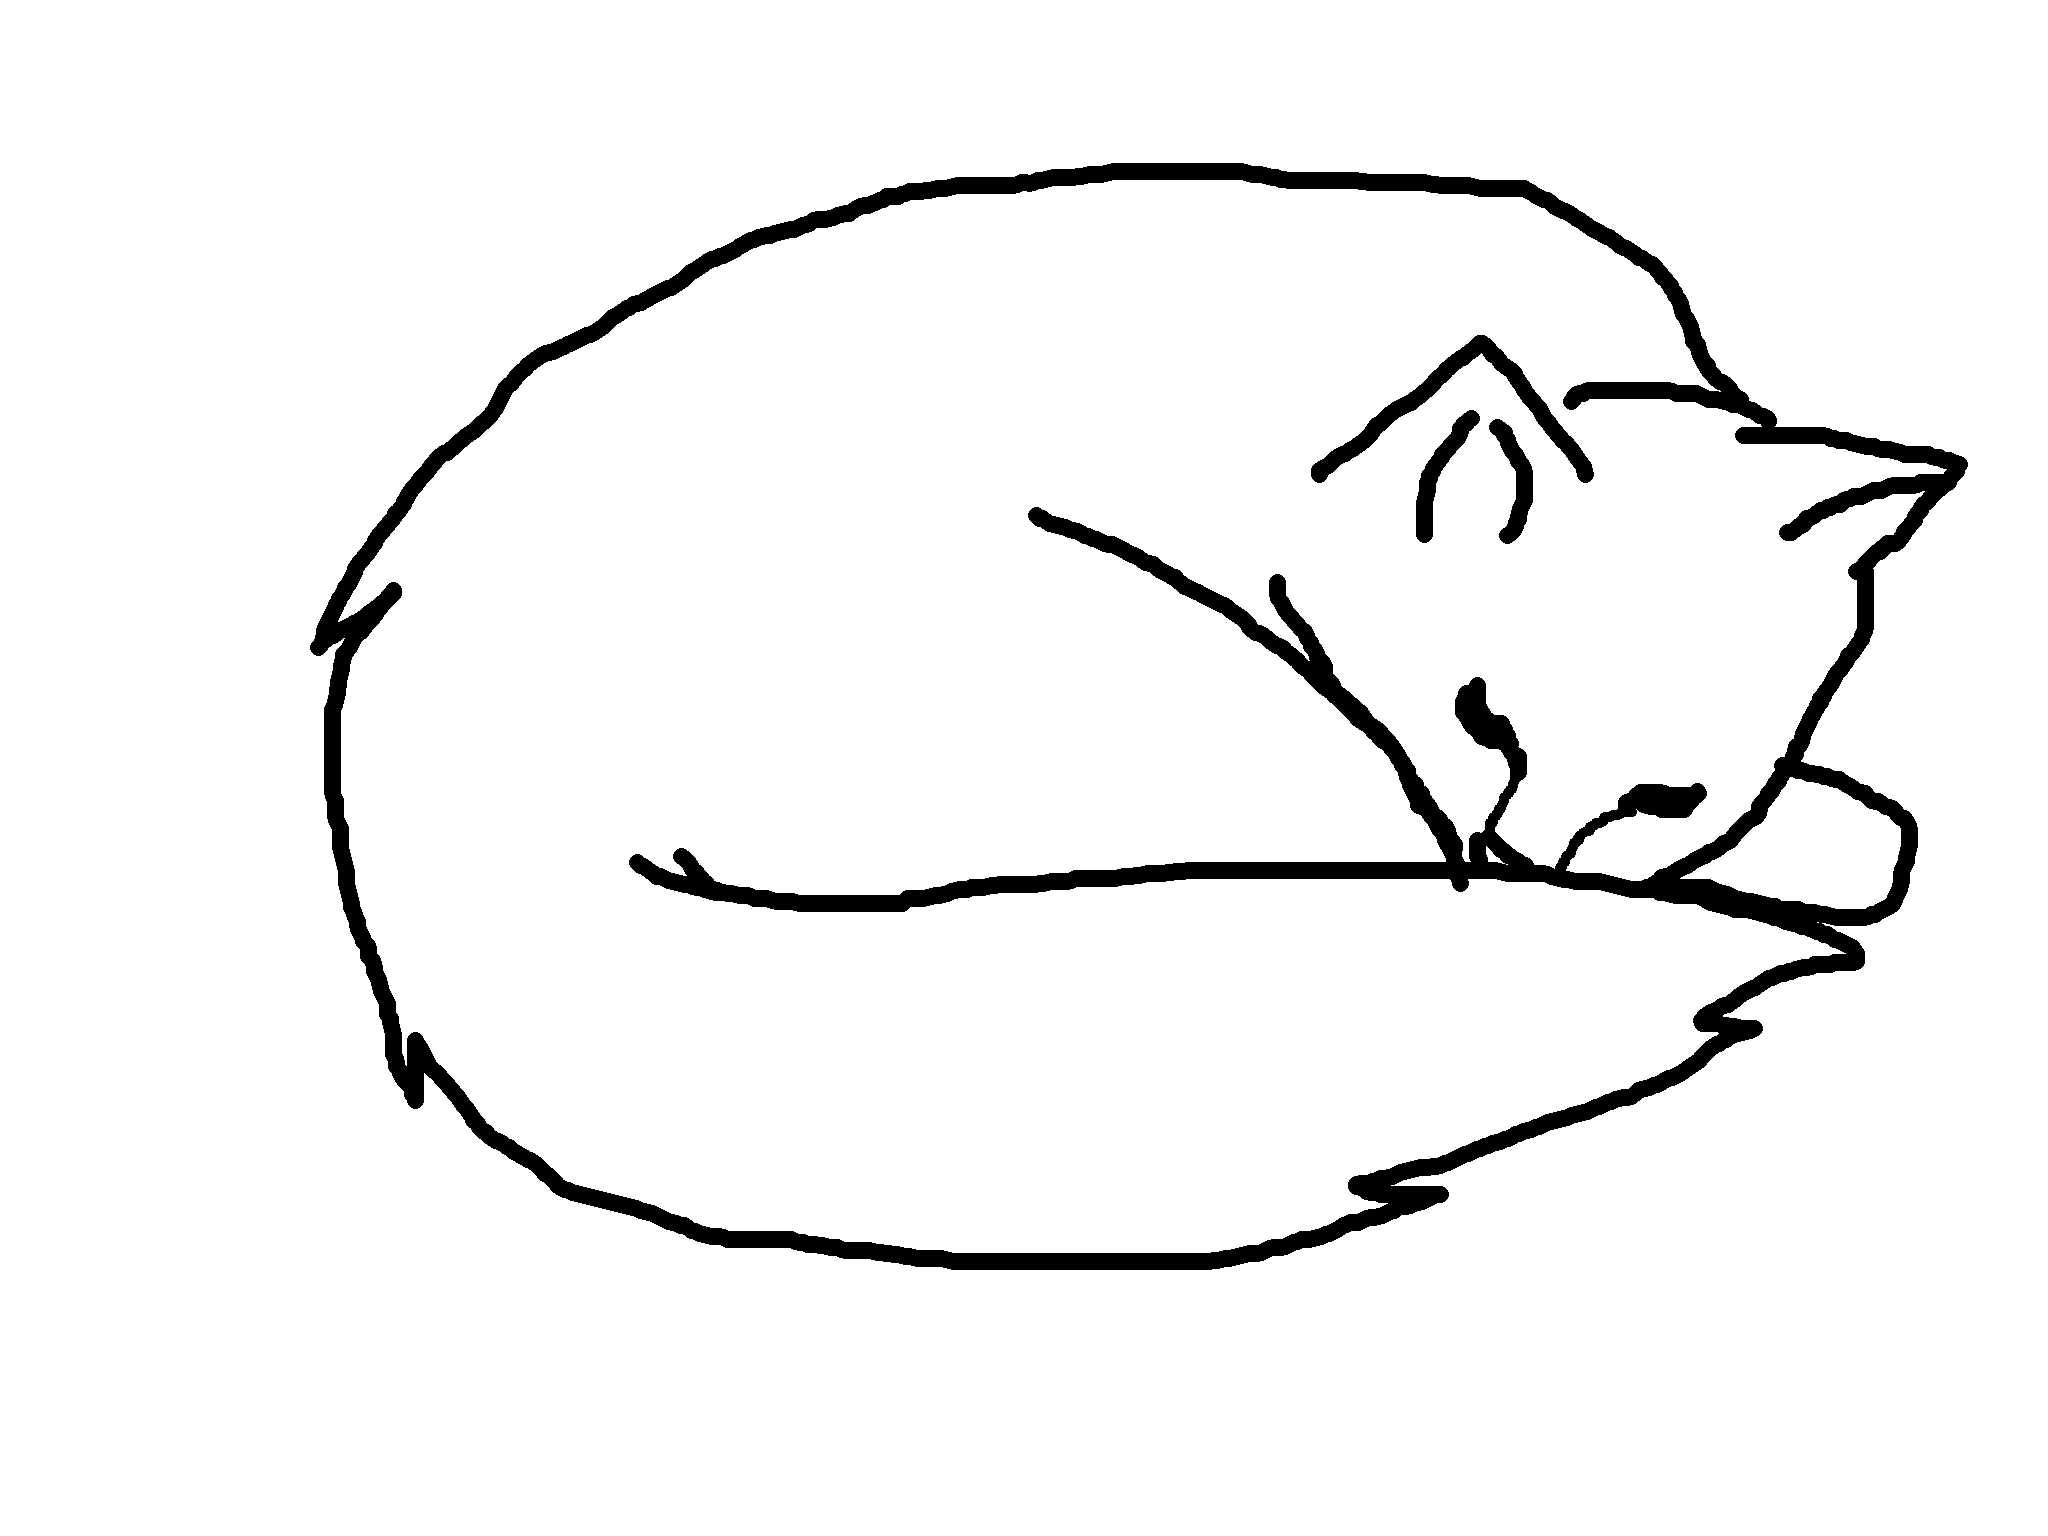 Sleeping Cat Drawing - ClipArt Best